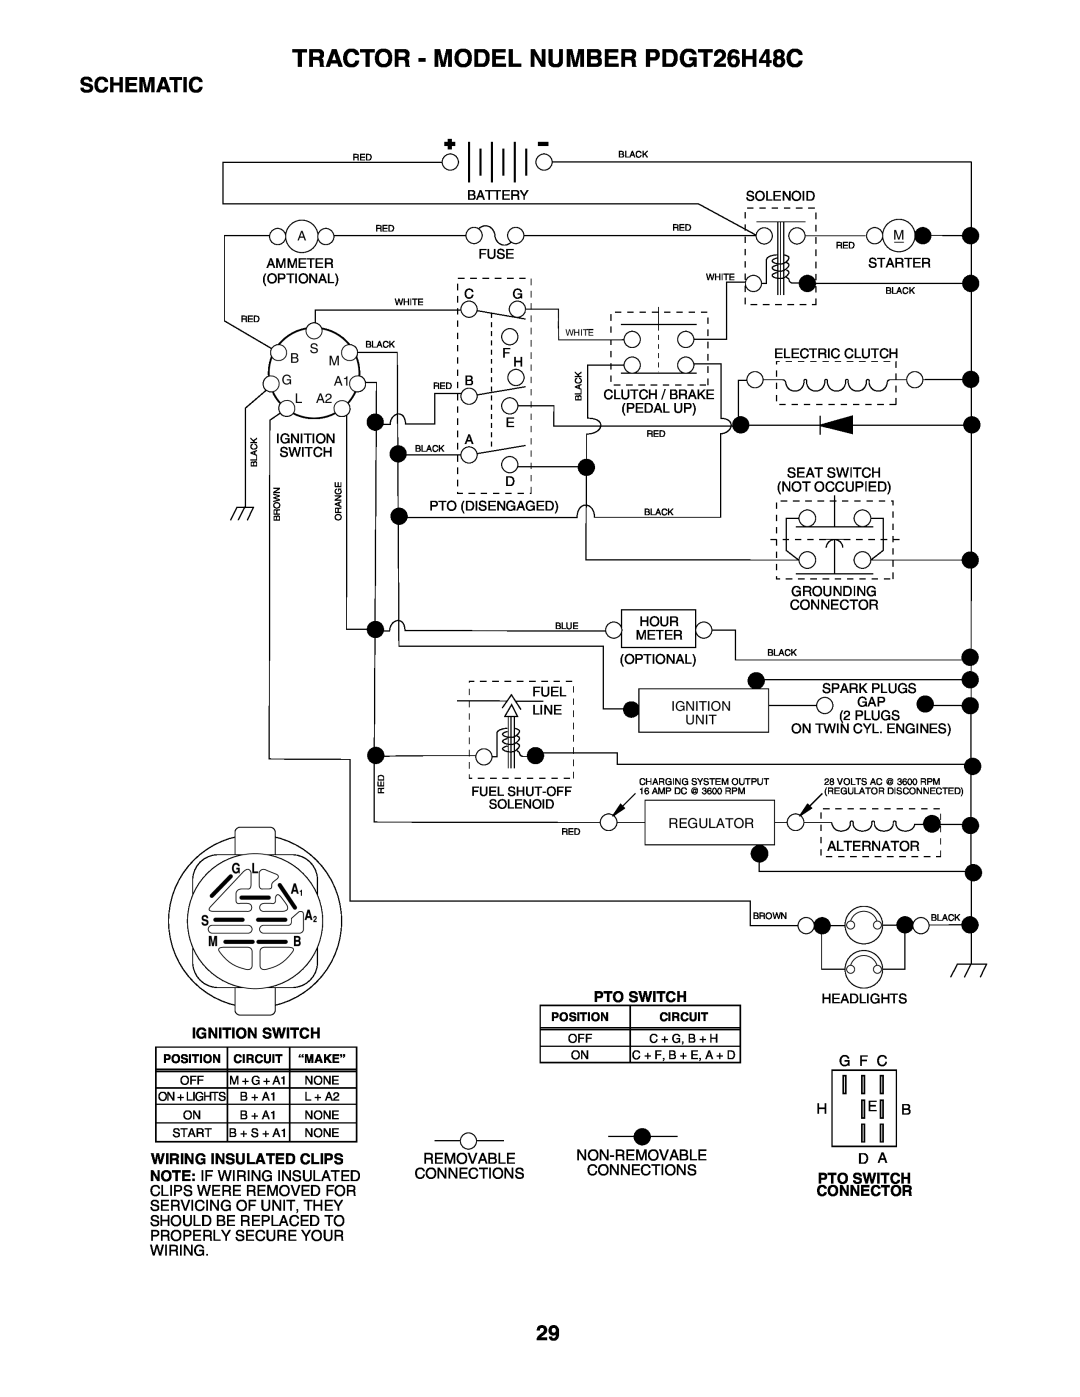 Poulan owner manual TRACTOR - MODEL NUMBER PDGT26H48C, Schematic, Removable Non-Removable Connections Connections, G F C 